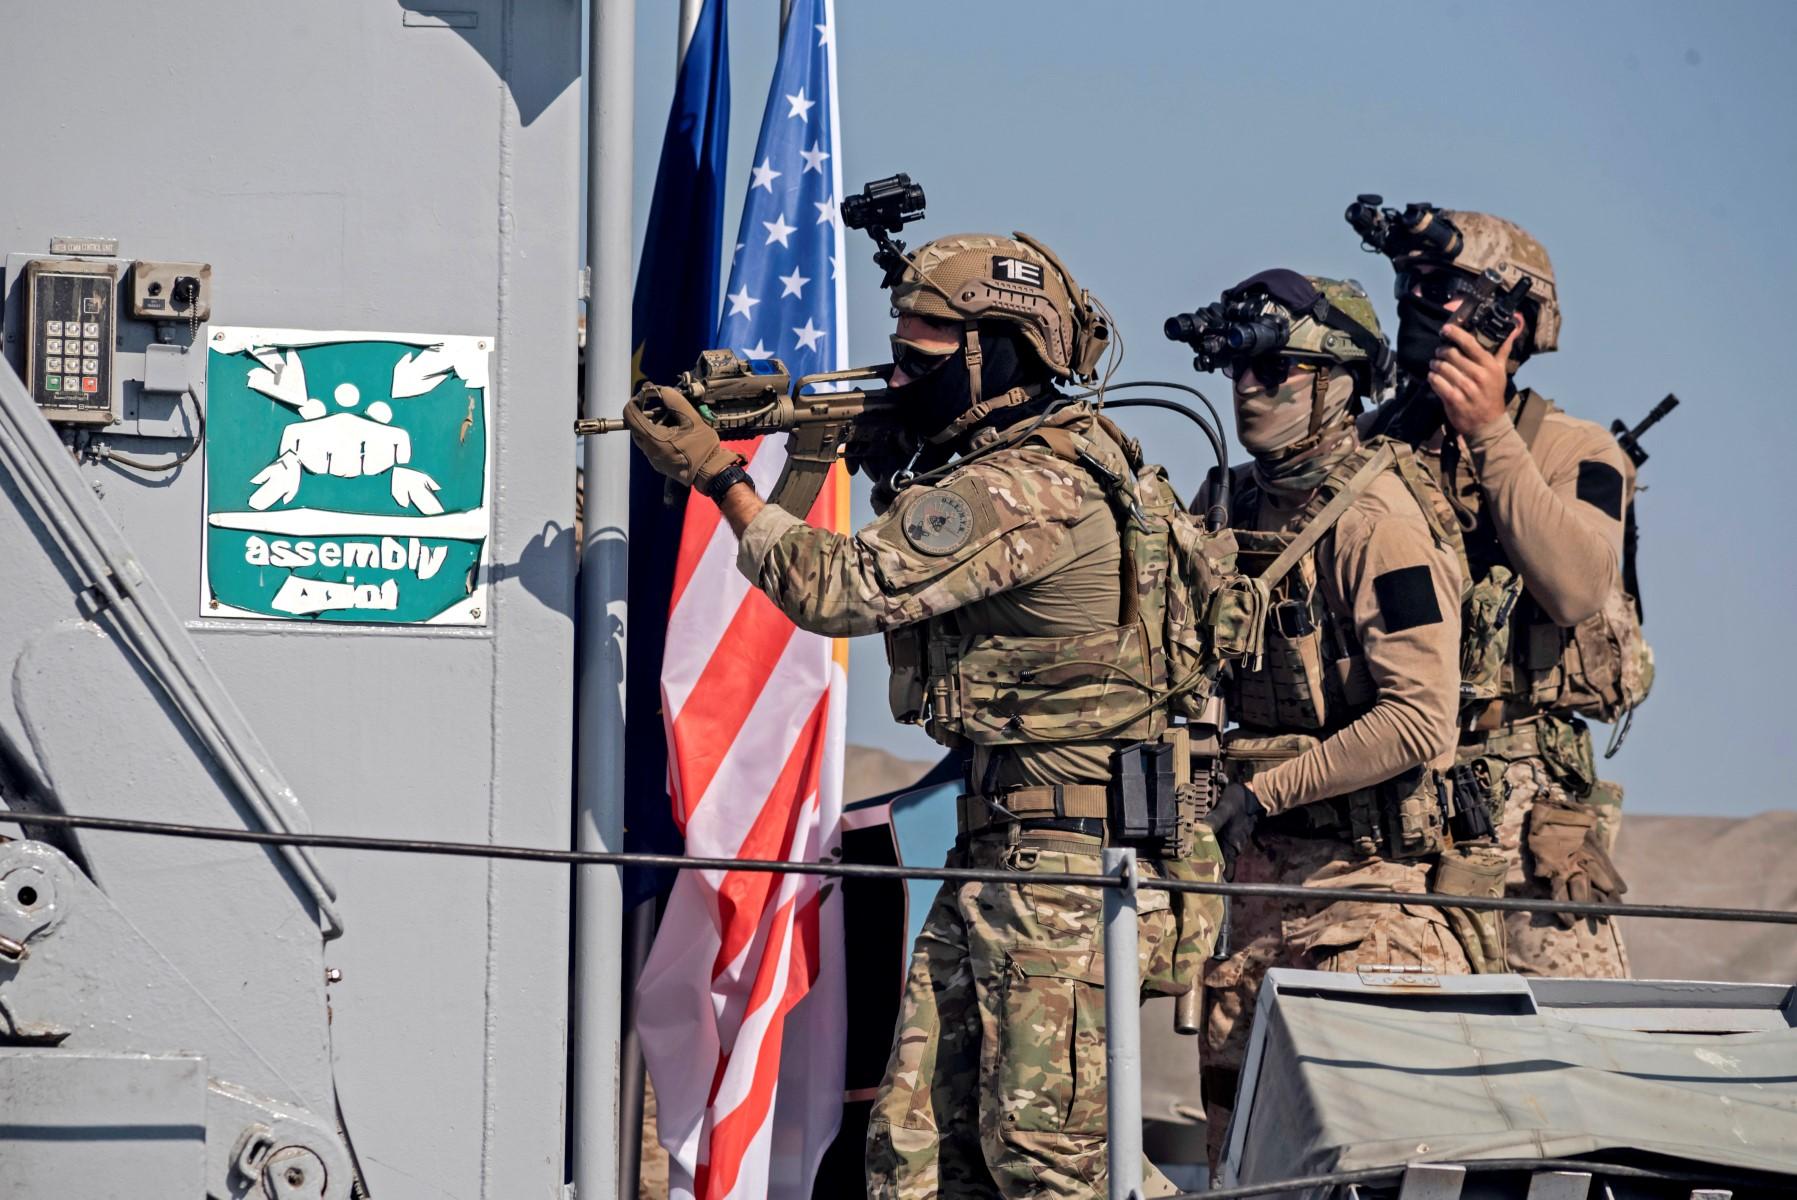 Cypriot Navy special forces and US Navy Seals take part in a joint US-Cyprus rescue exercise in the port of the southern Cypriot port city of Limassol on Sept 10, 2021. Photo: AFP